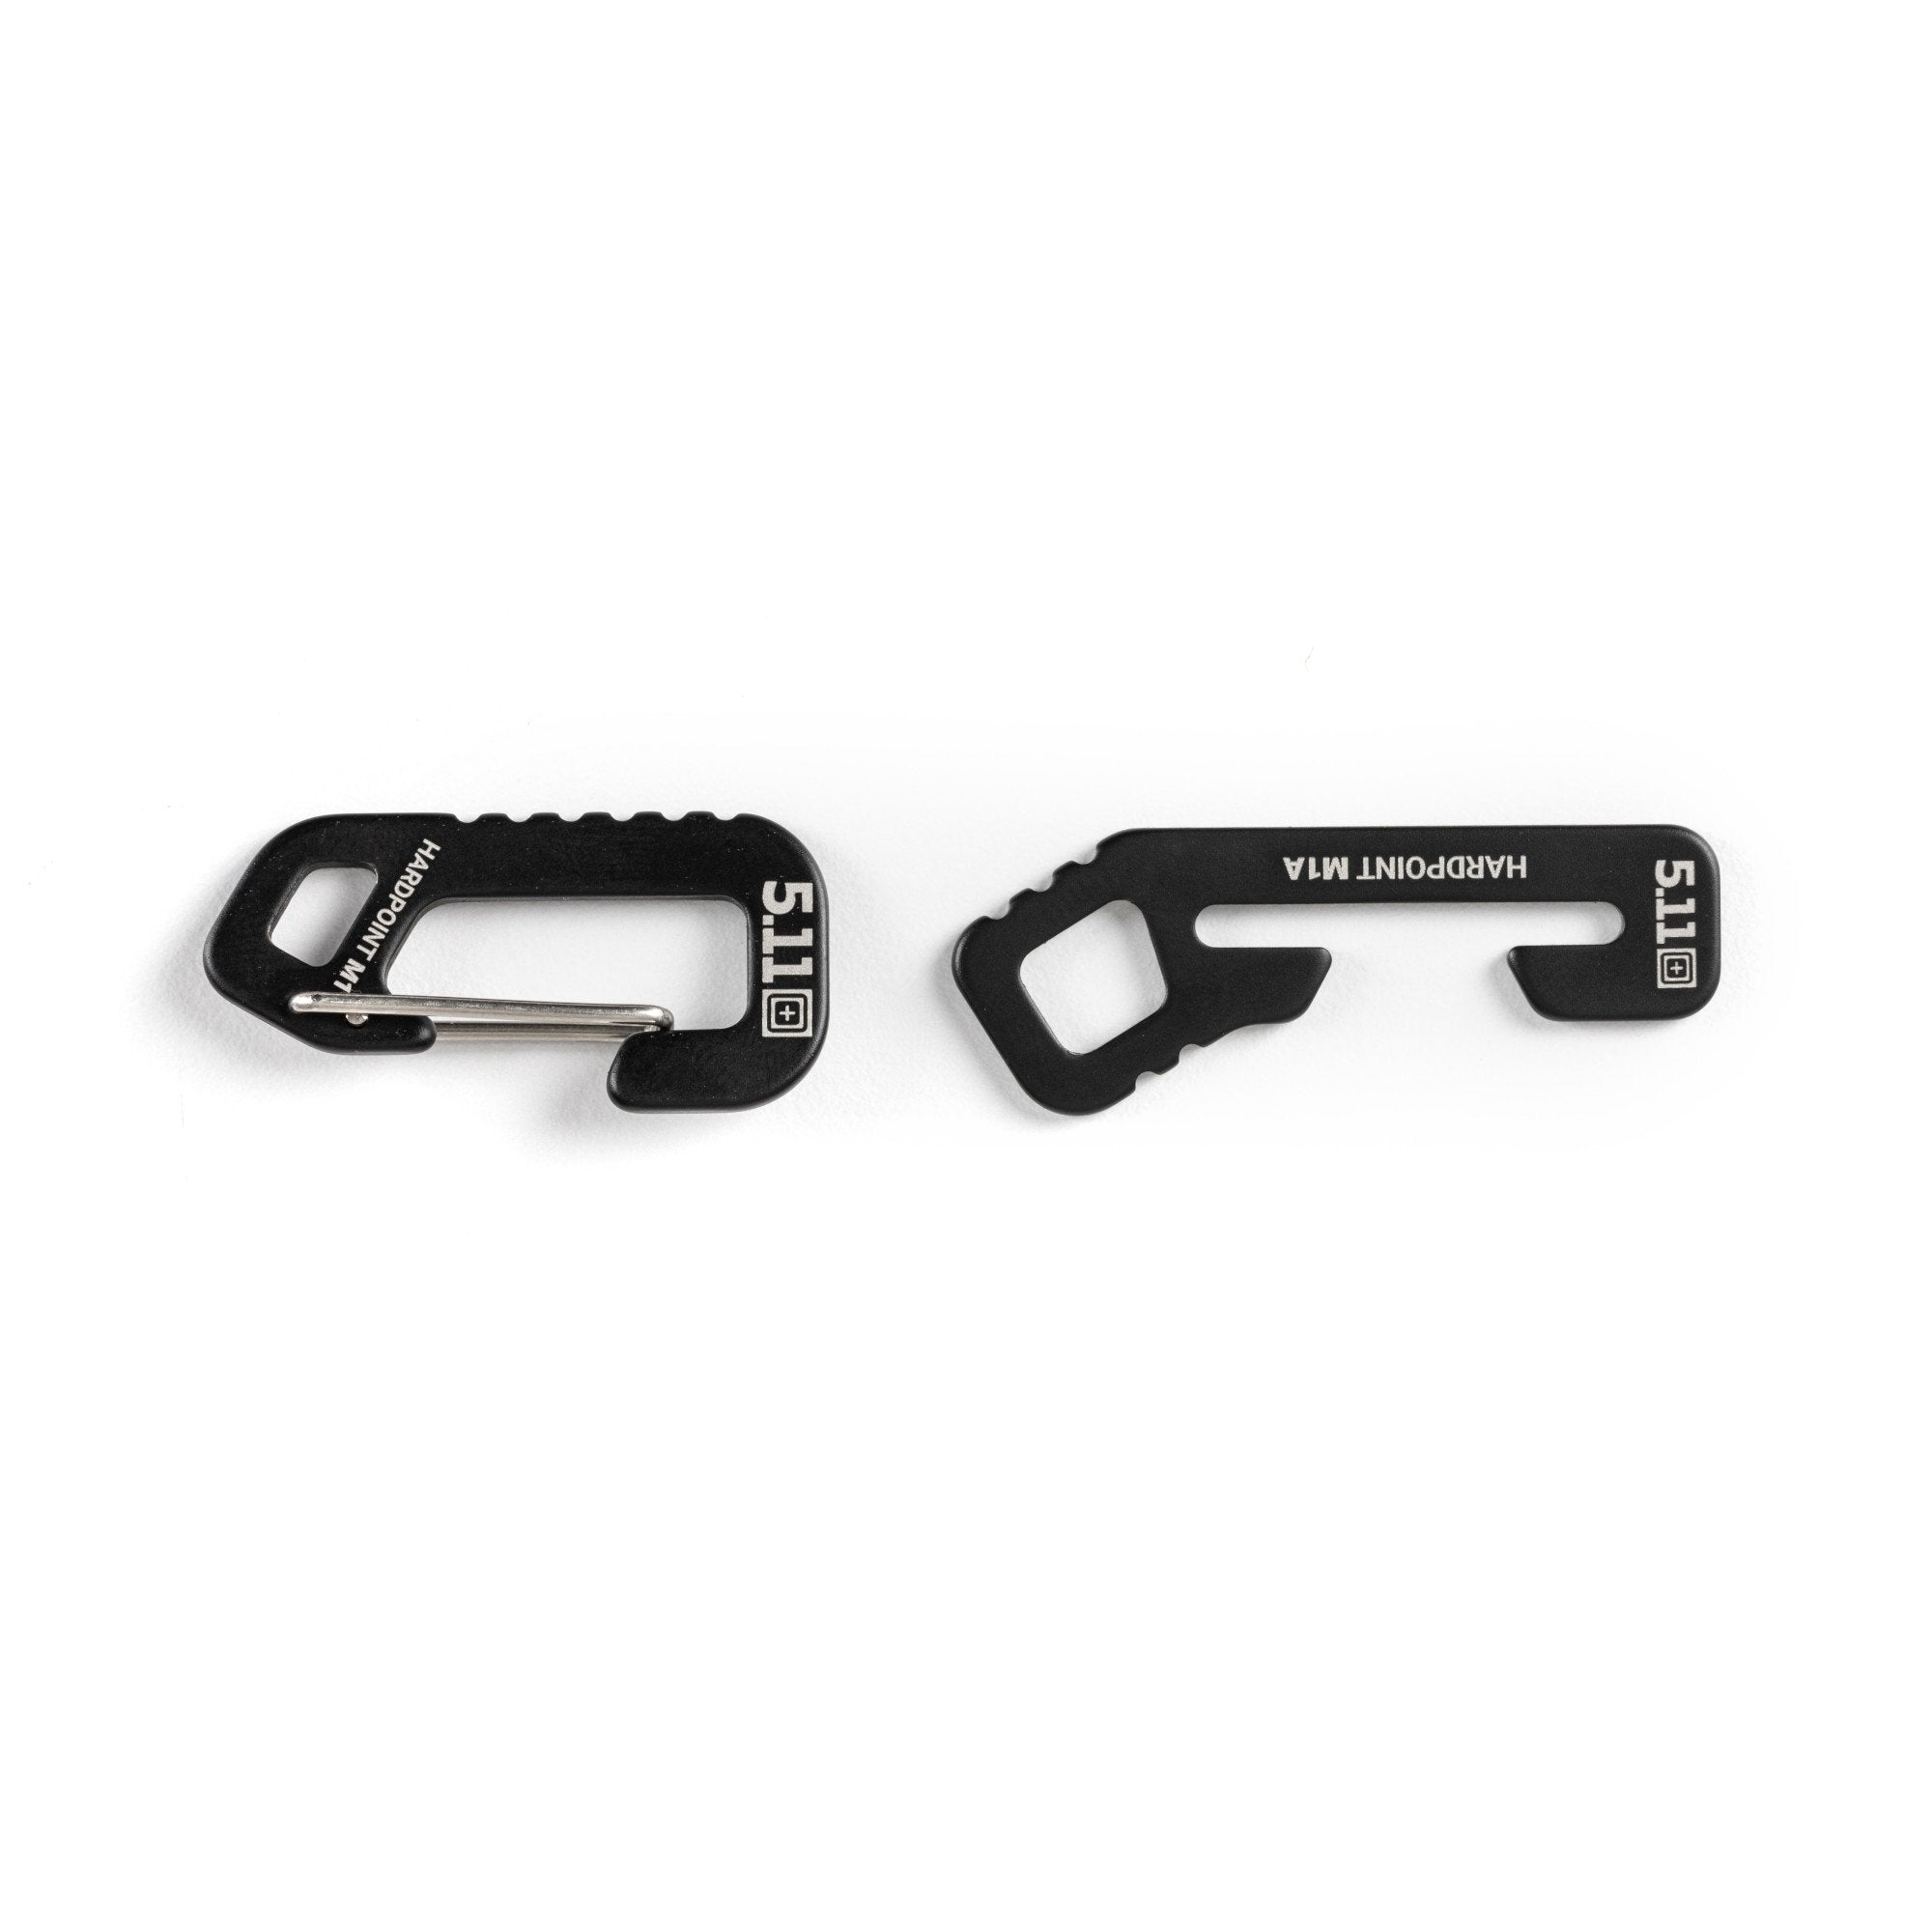 5.11 Tactical Hardpoint M1+ MD Carabiner Outdoor and Survival 5.11 Tactical Black Tactical Gear Supplier Tactical Distributors Australia